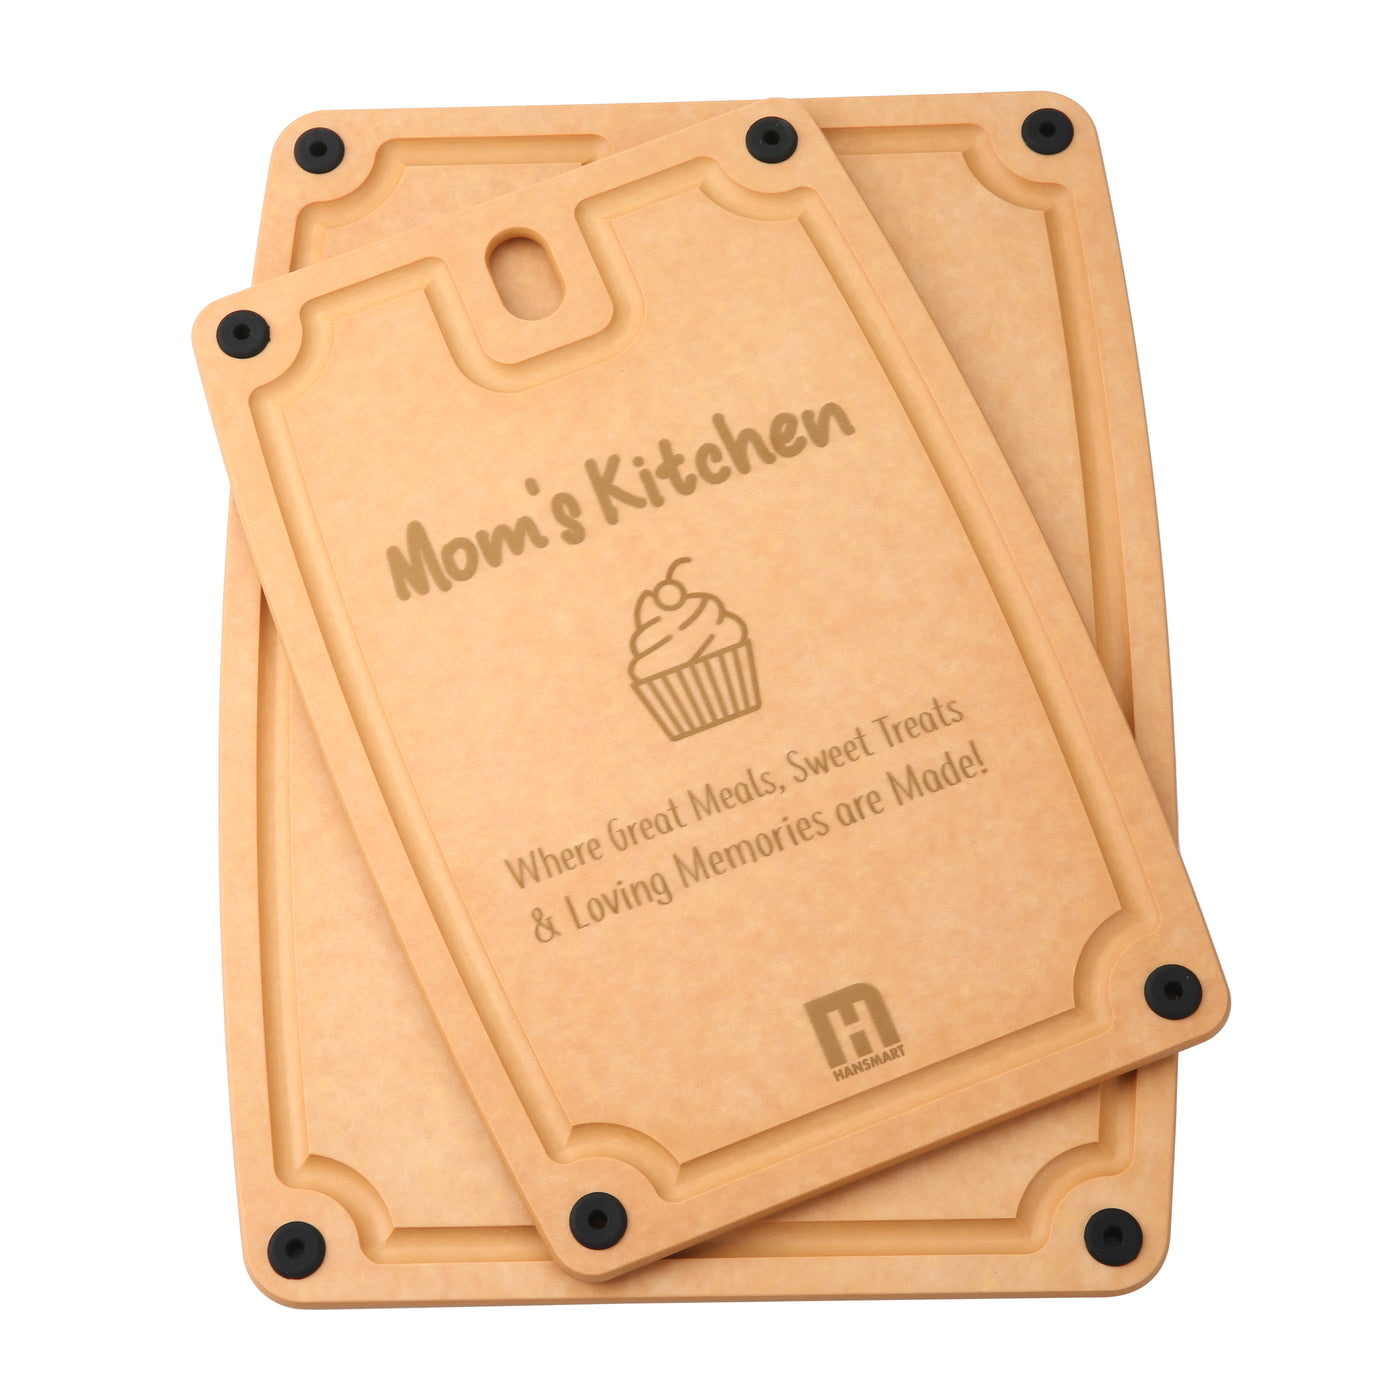 Hansmart 2-pc. Eco-Friendly Etched Composite Reversible Cutting Board Set with Handles